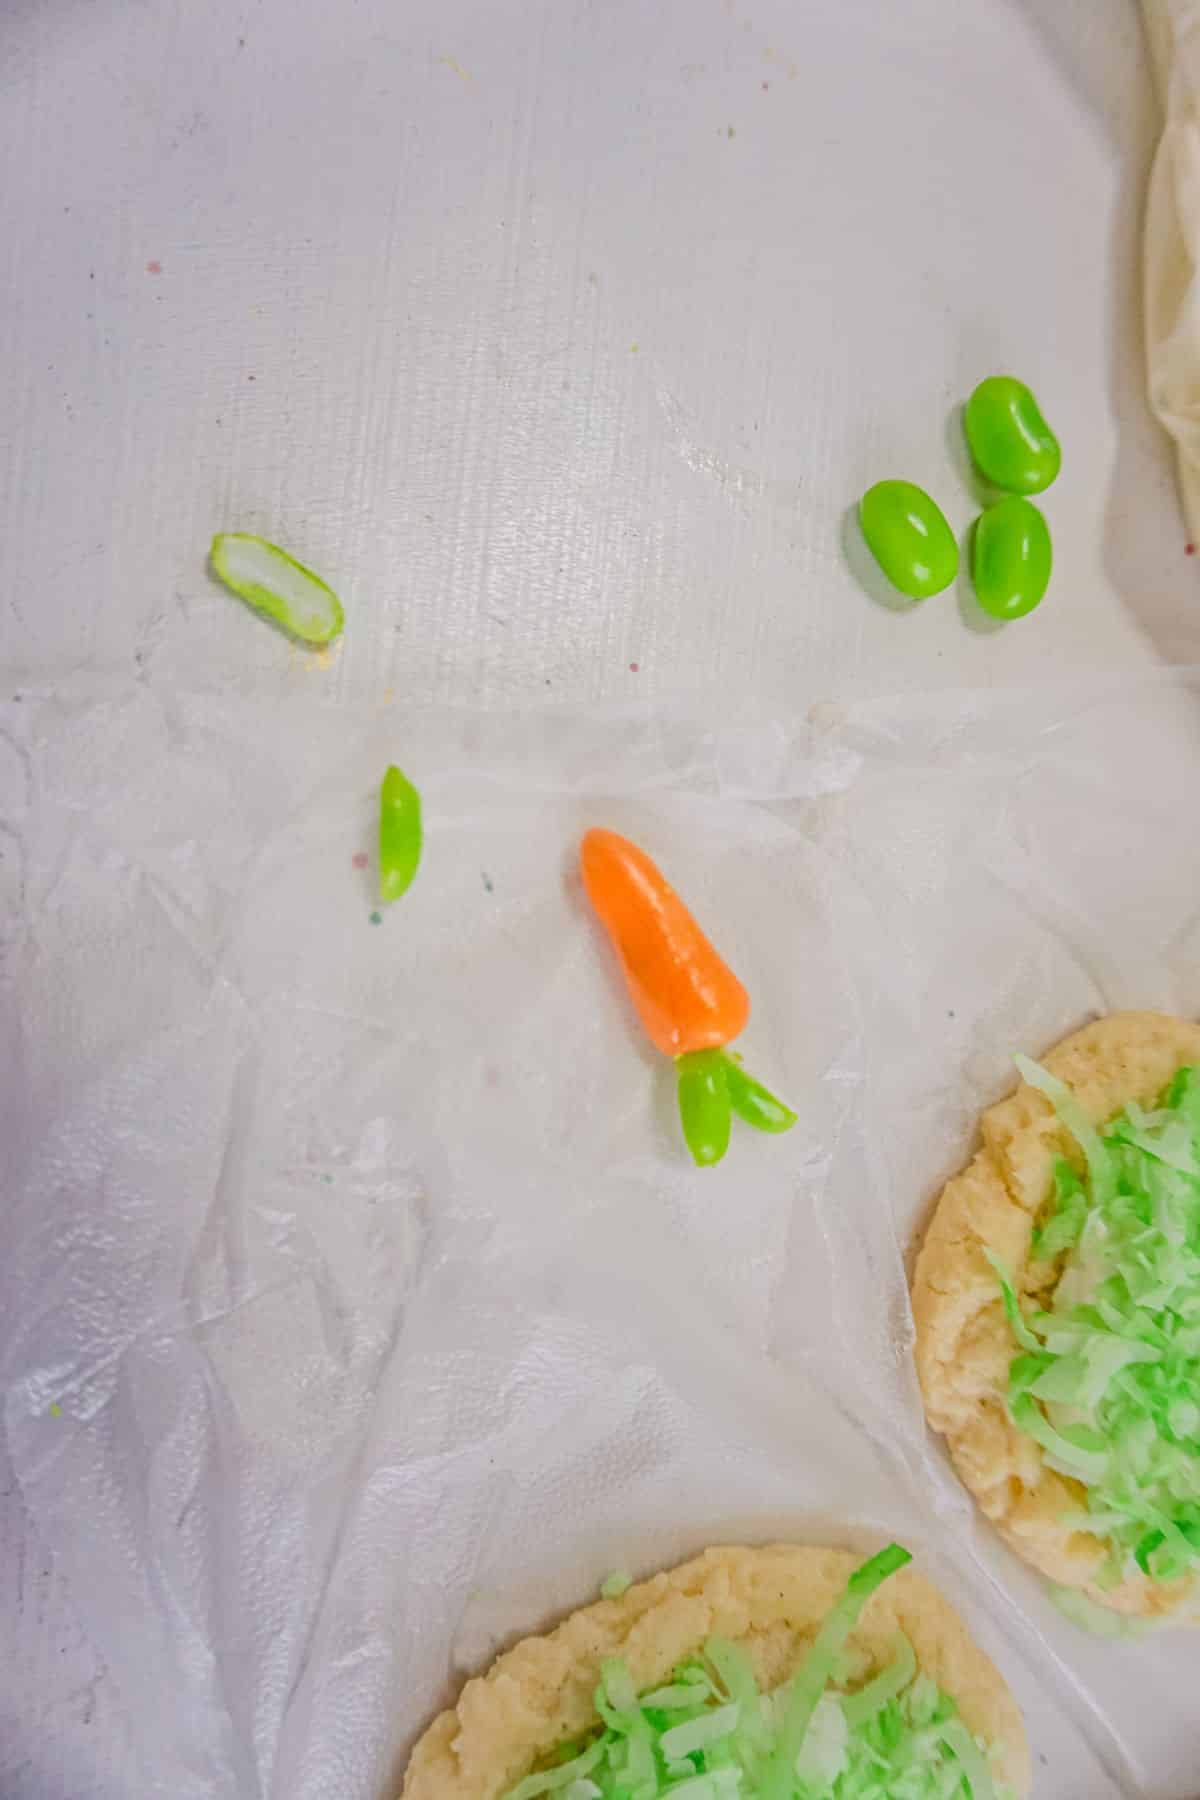 orange Starburst shaped into carrots with green jelly beans cut into portions.